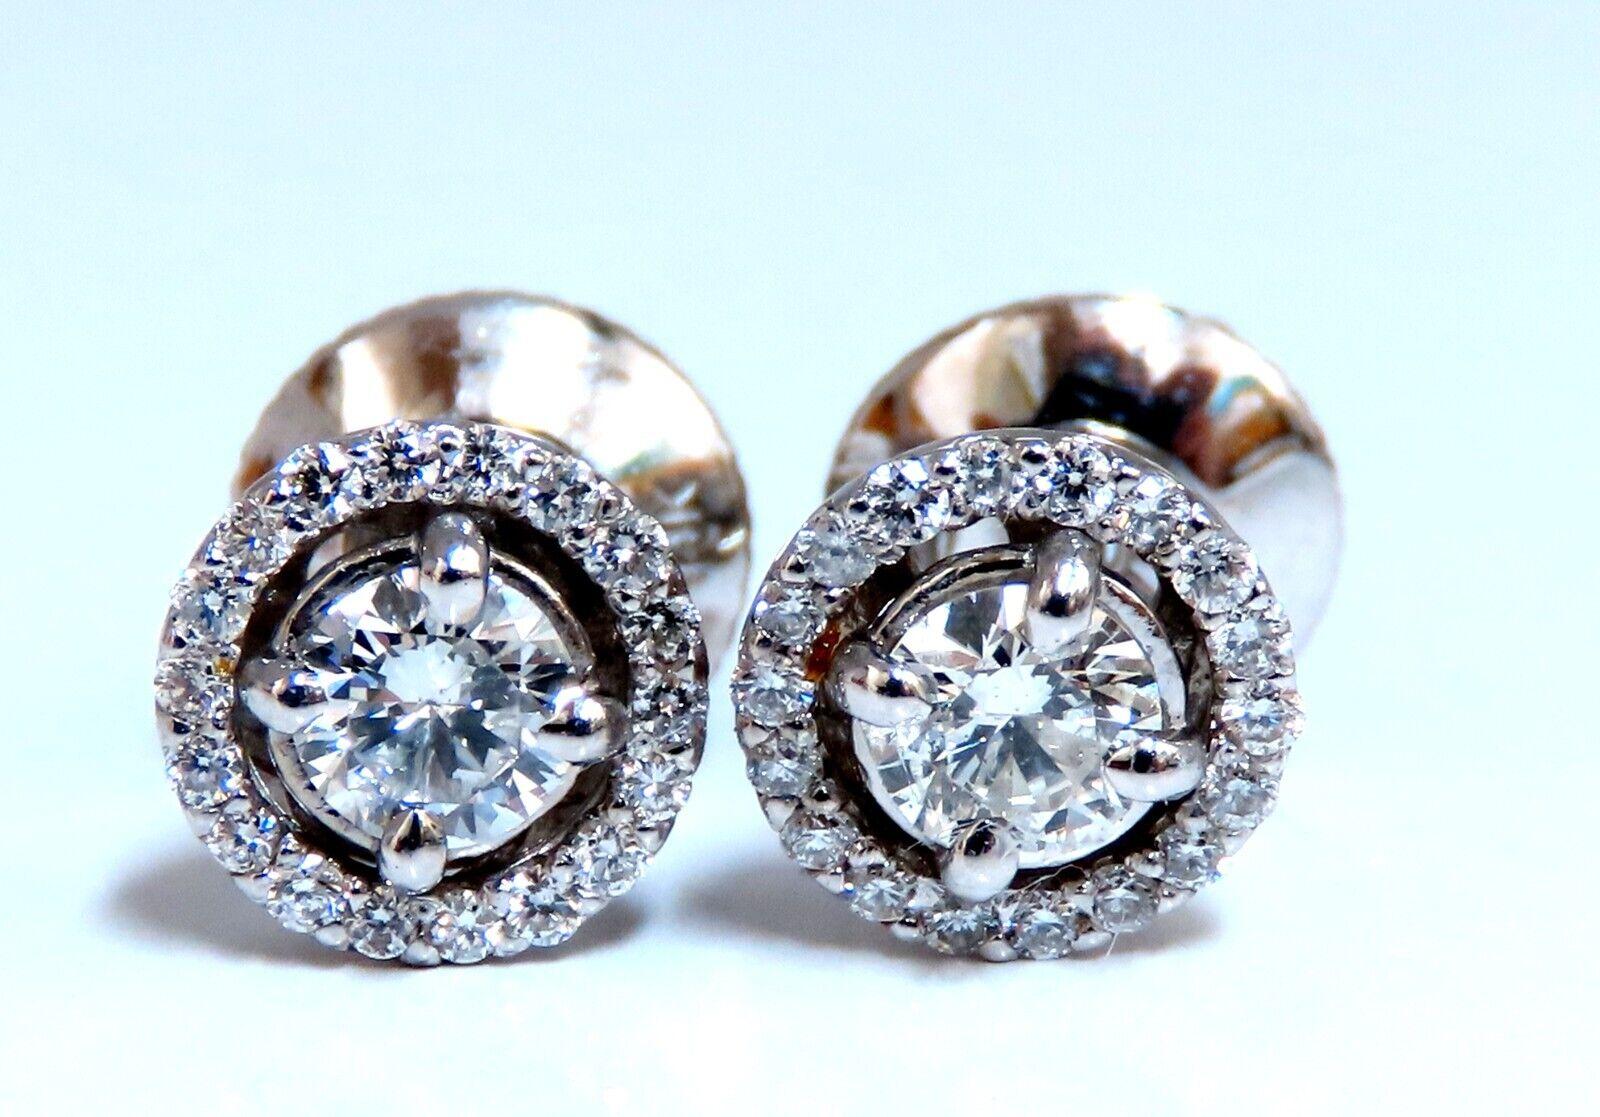 Cluster diamond earrings.

Natural round diamonds

.40ct center (2) diamonds.

.71ct side diamond accents.

G - color vs2  clarity

14 karat white gold 2.2 grams

Earrings measure 7mm wide

$4,000 appraisal certificate to accompany